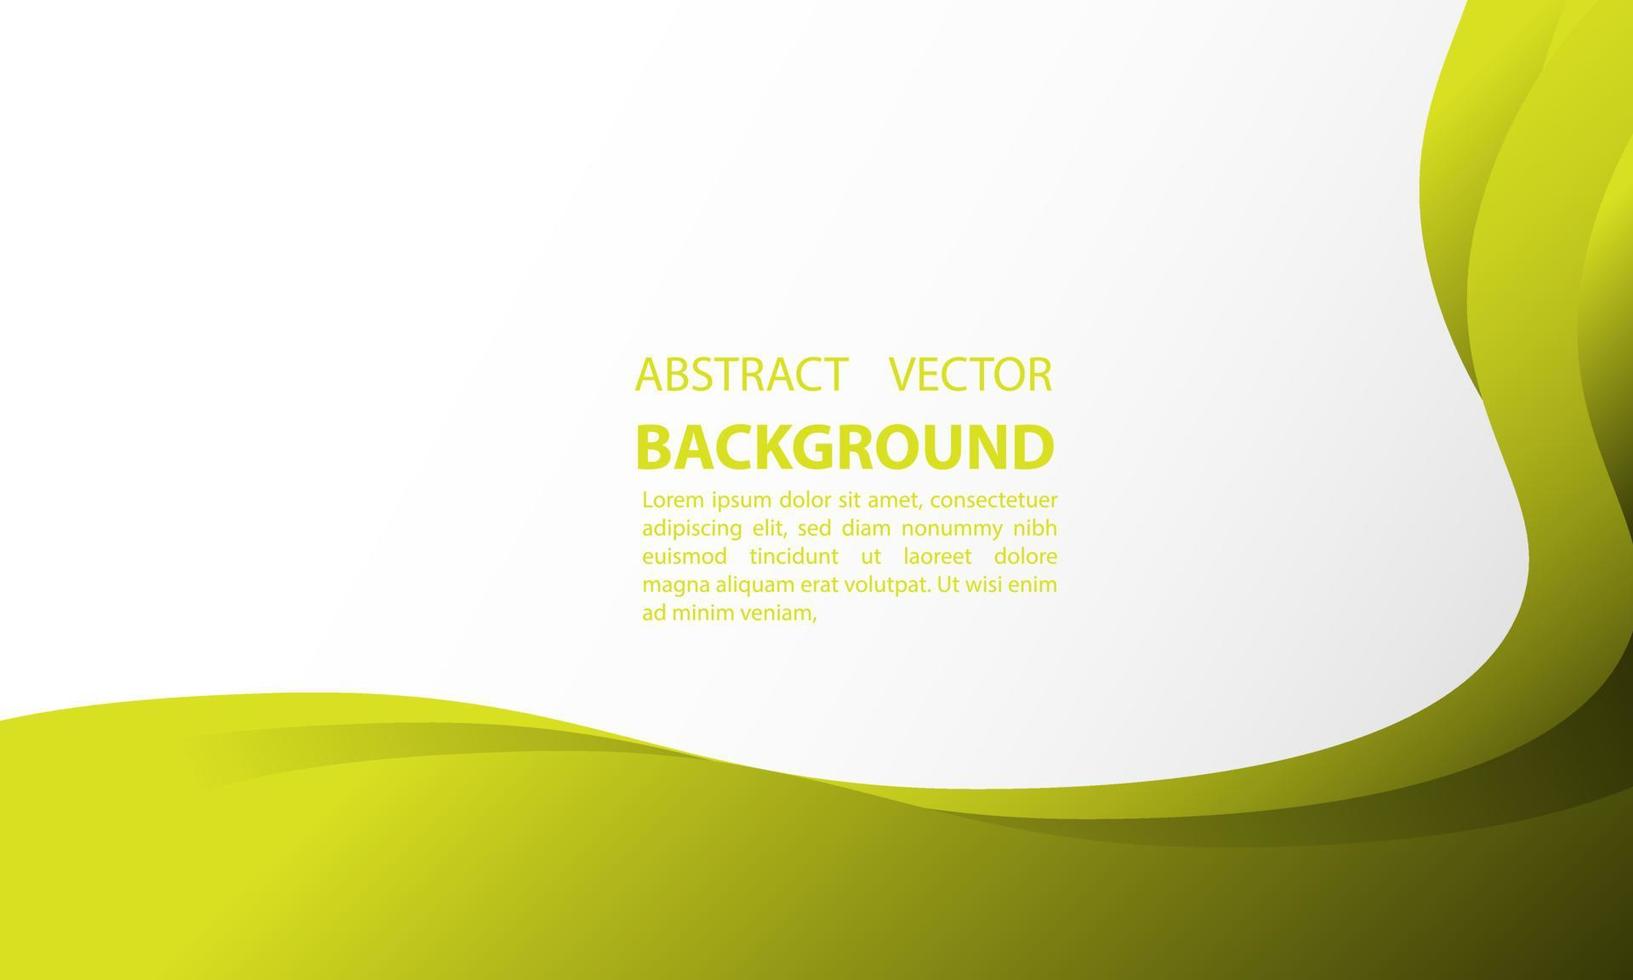 background abtrak gradient geometric liquid waves form abstract lines of colorful yellow vectors, for posters, banners, and others, vector design illustration eps 10